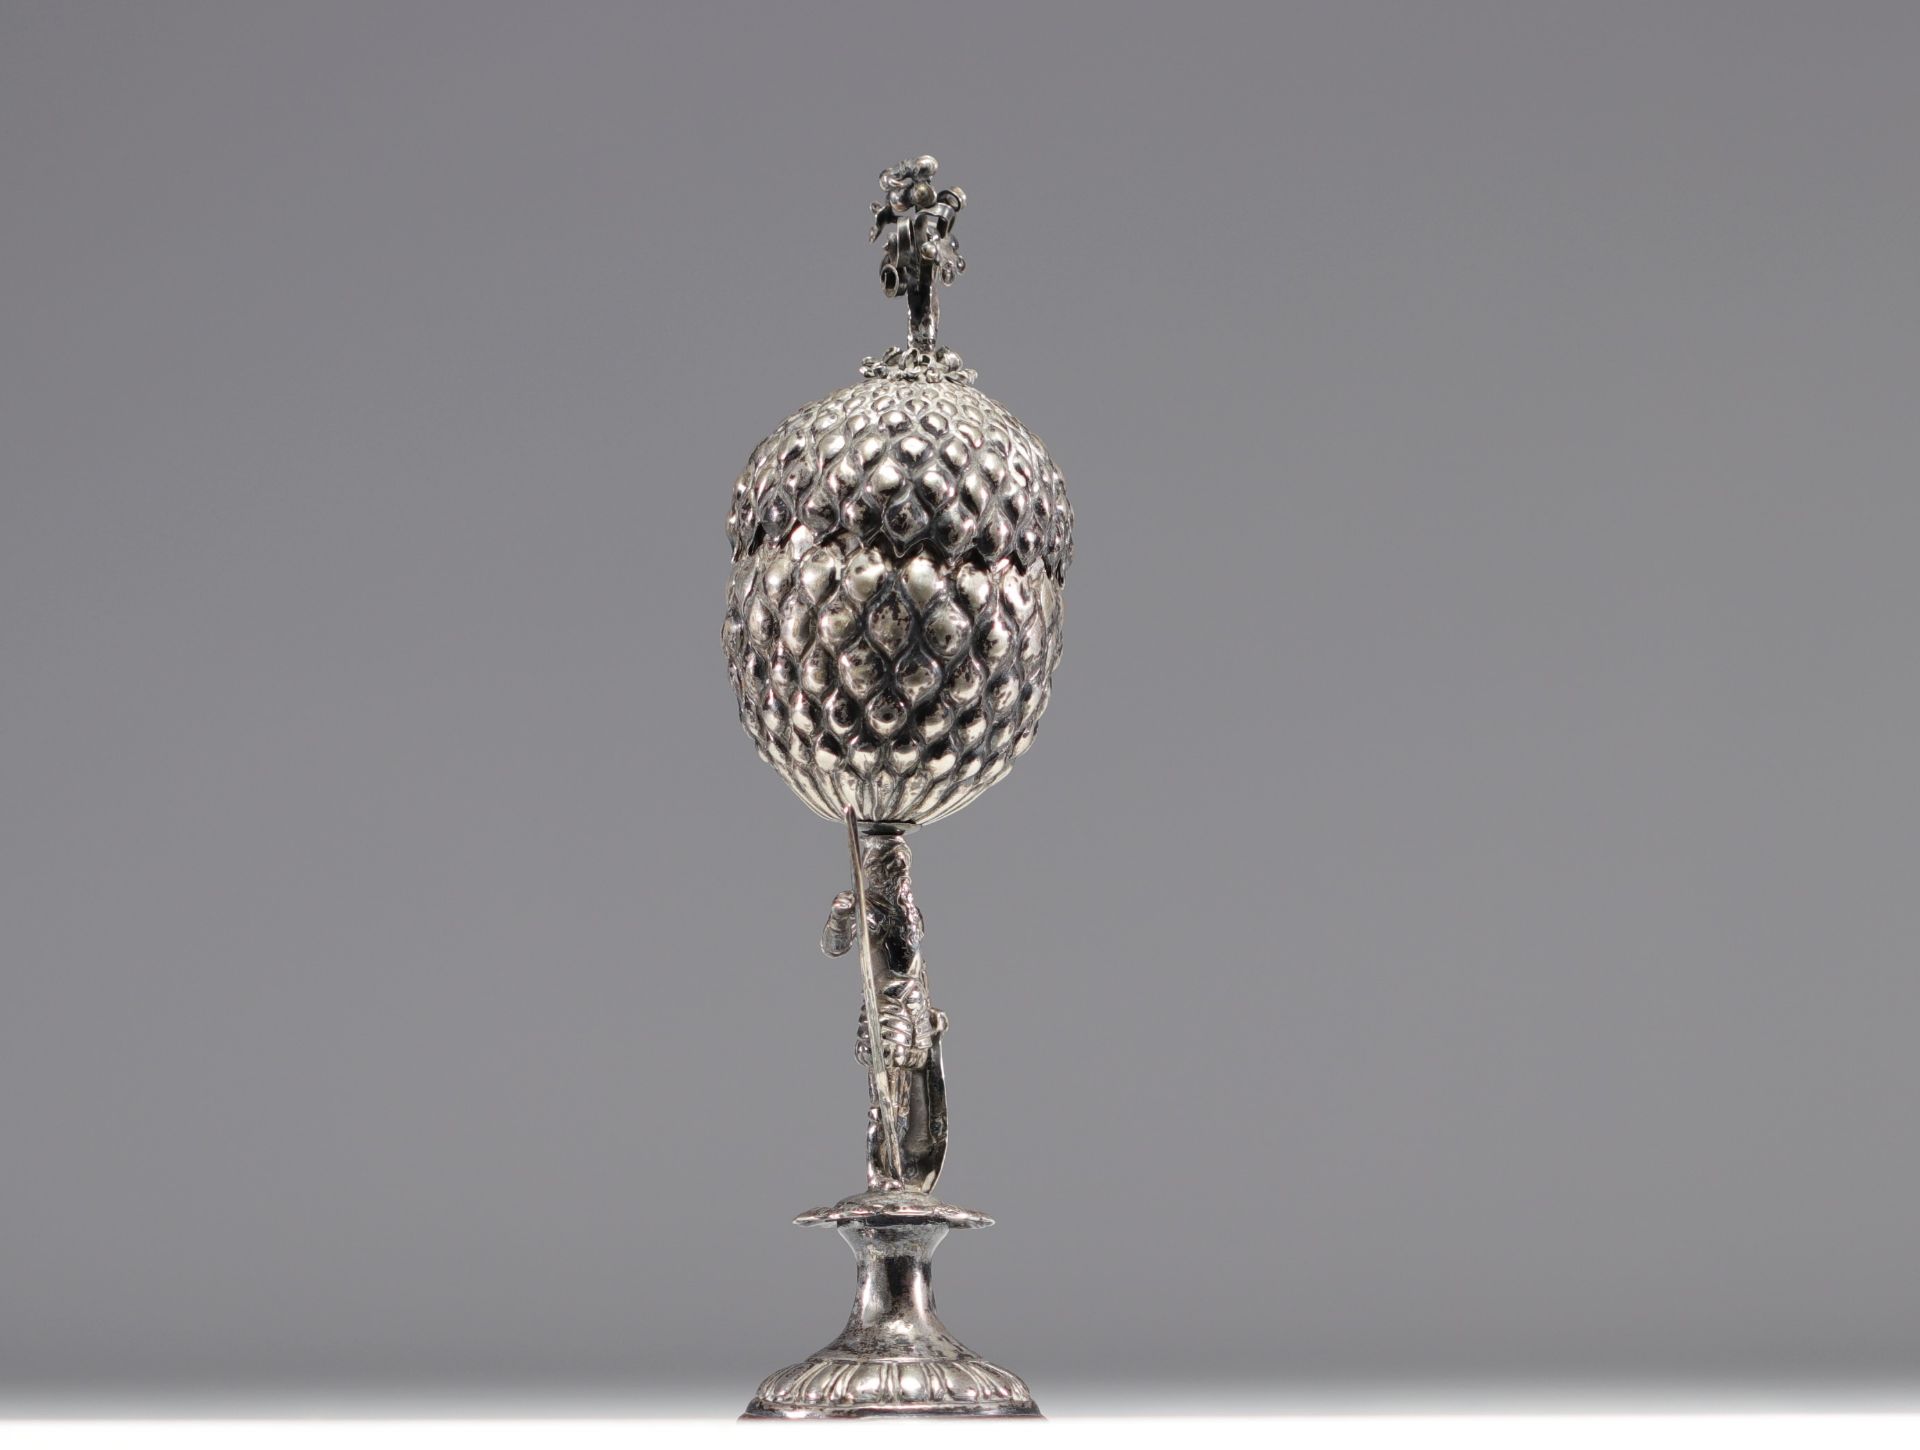 Covered hanap with pineapple-shaped lid in solid silver Nuremberg pewter from 17th centuryÂ - Image 3 of 4